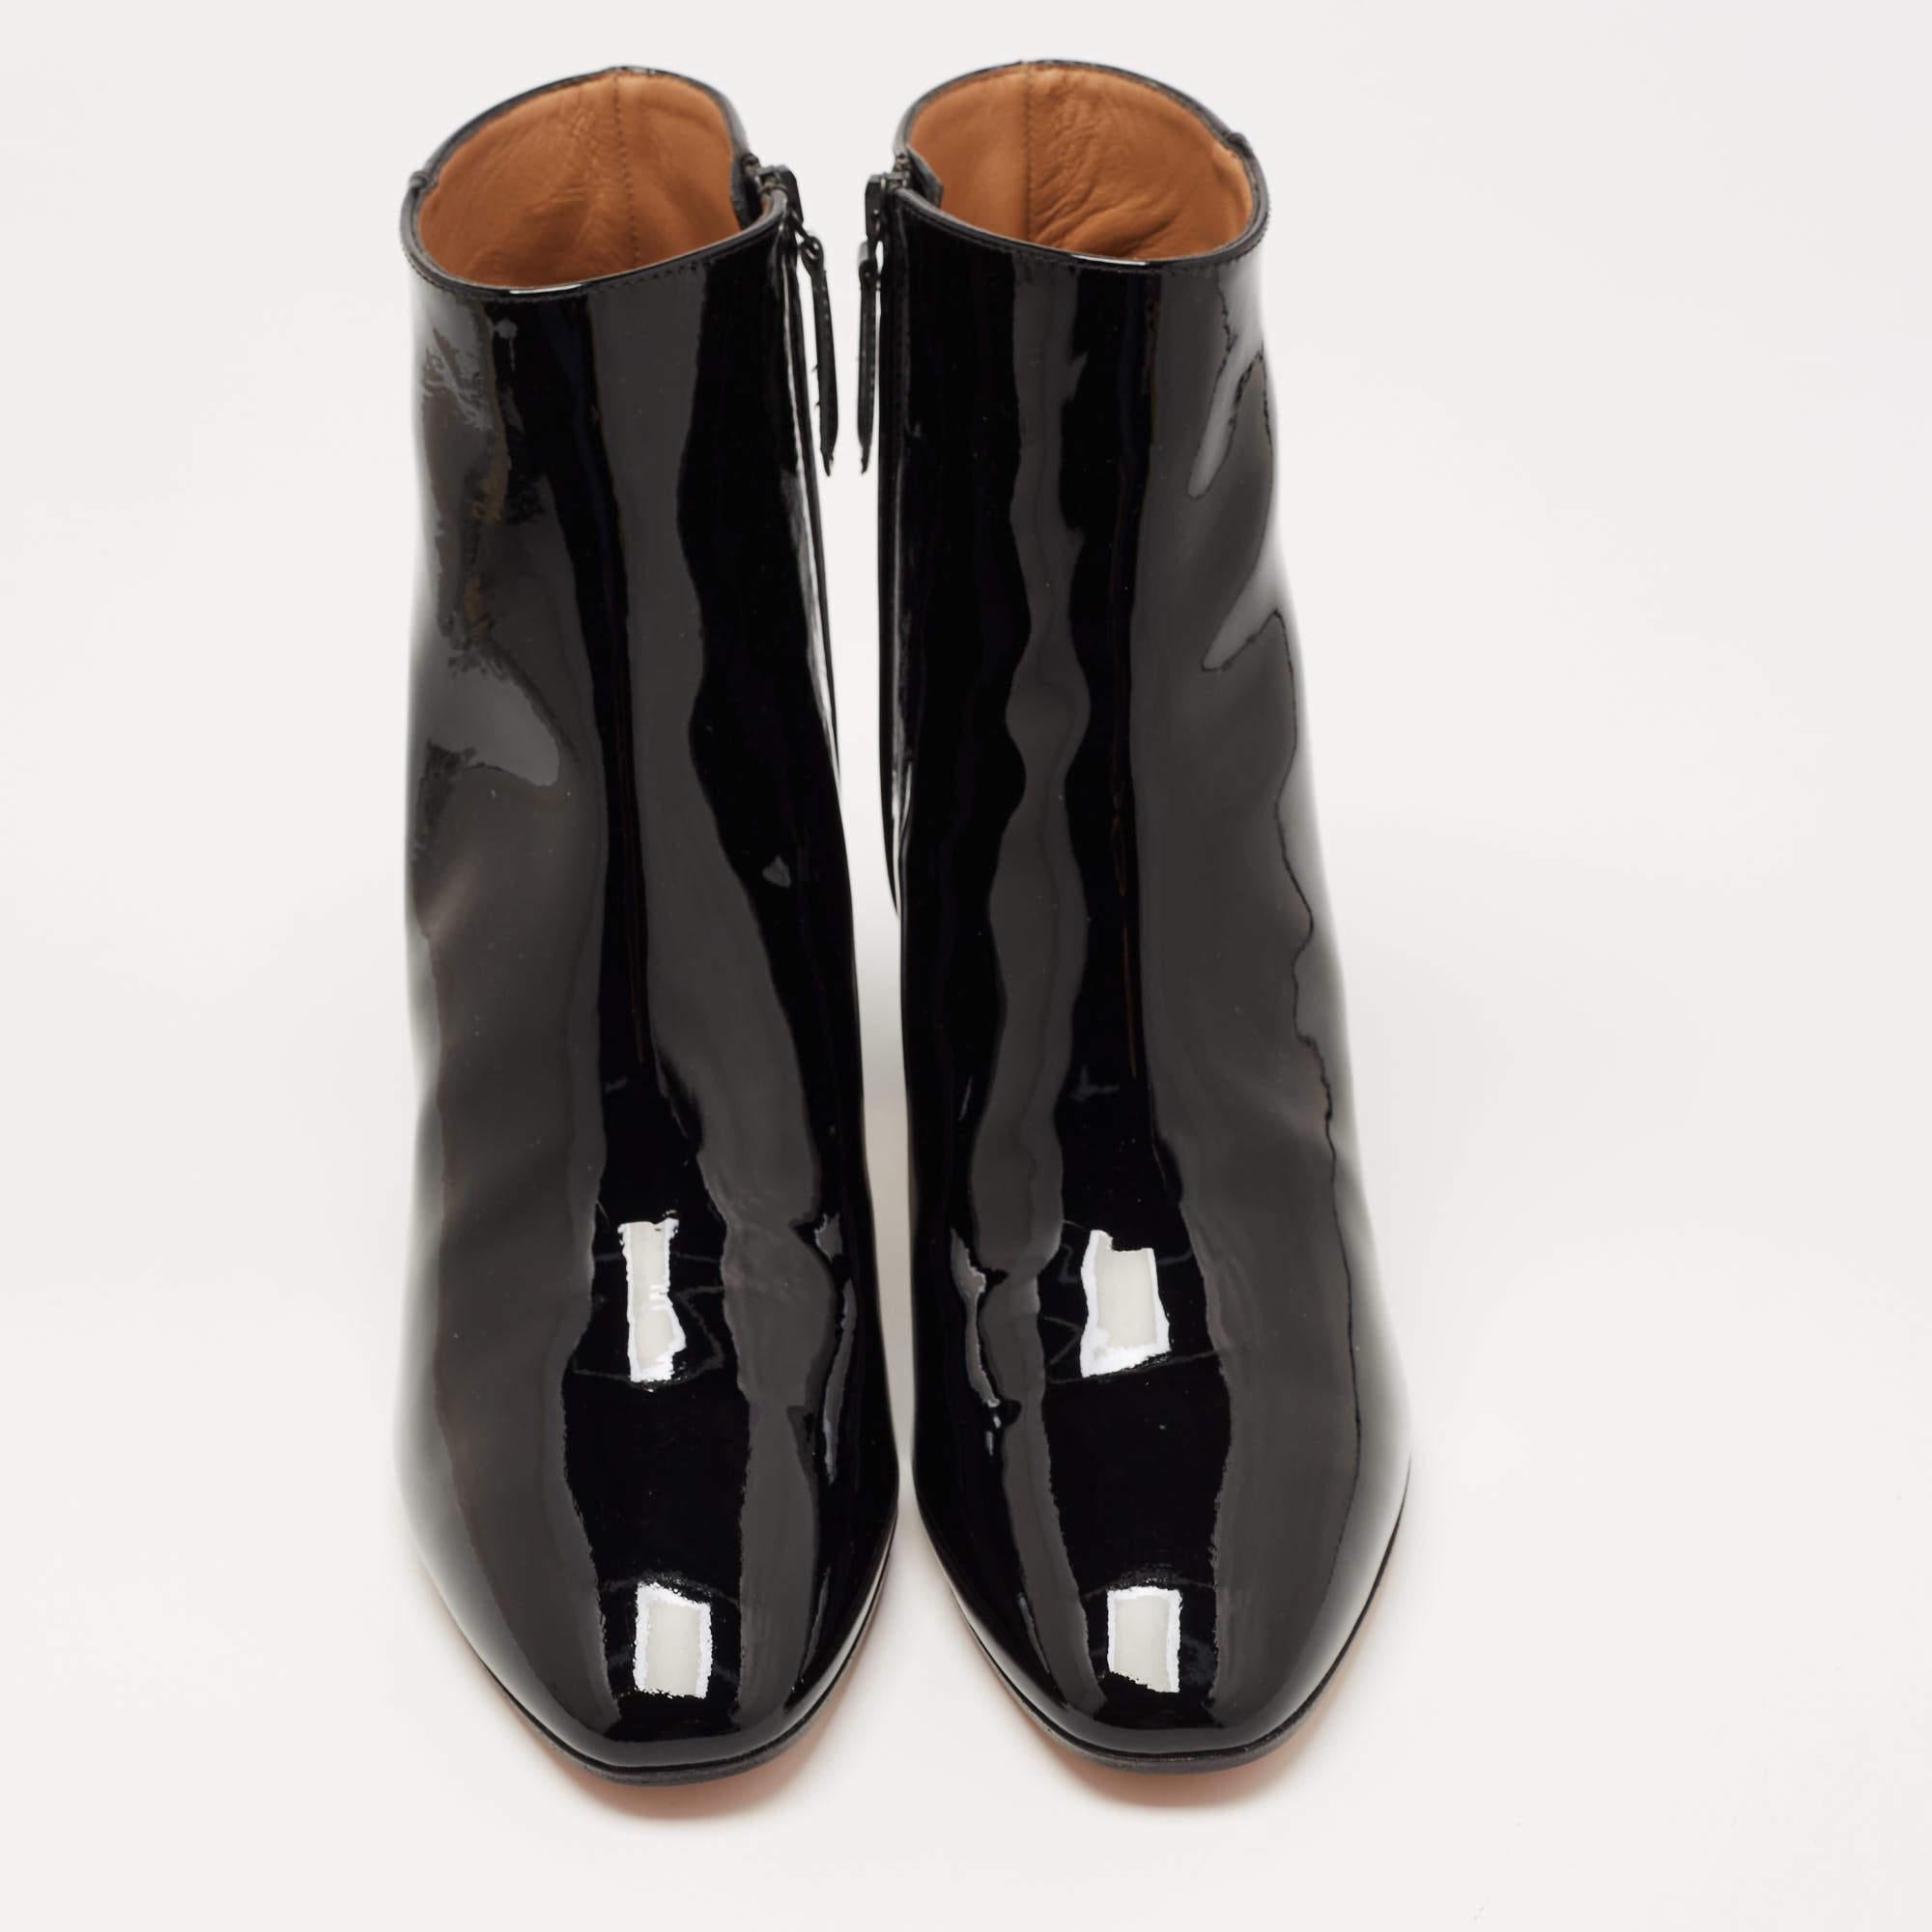 Meticulously designed into a classy silhouette, these boots are on-point with style. They come with comfortable insoles and durable outsoles to last you a long time. These boots are just amazing, and you need to get them right away.

Includes: